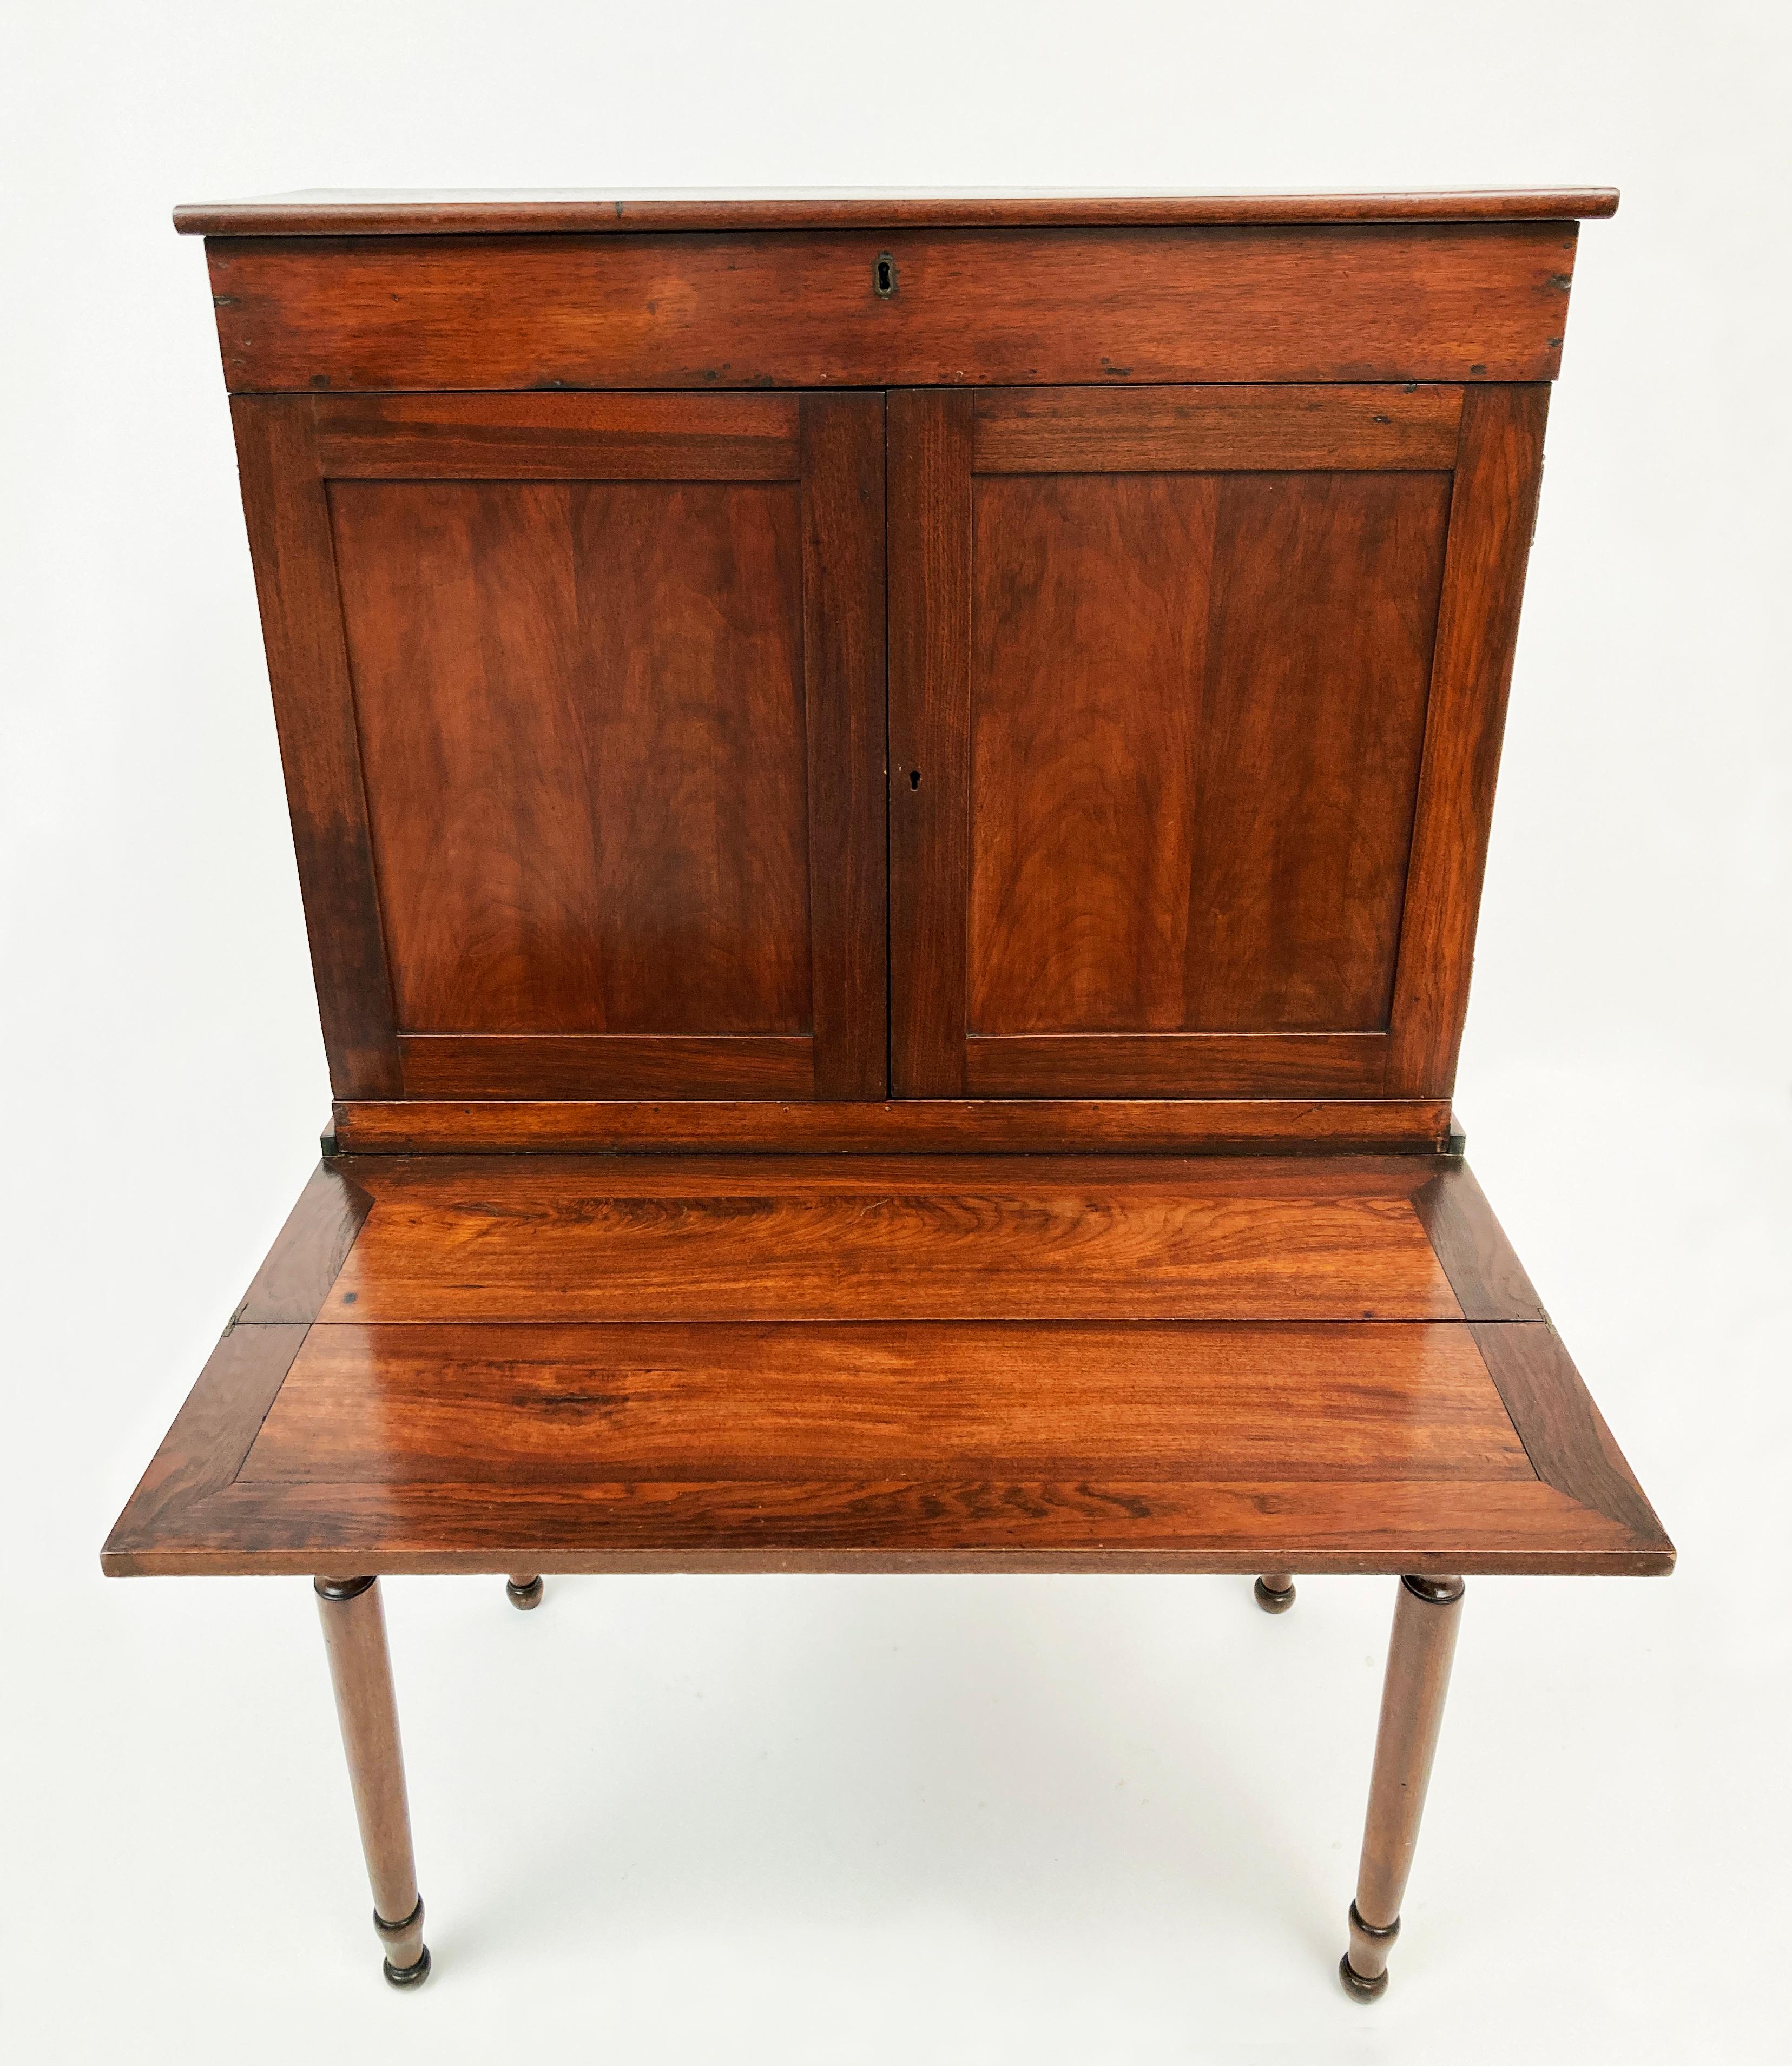 Hand-Crafted Early 19th Century American Walnut Federal Style Drop-Front Desk For Sale